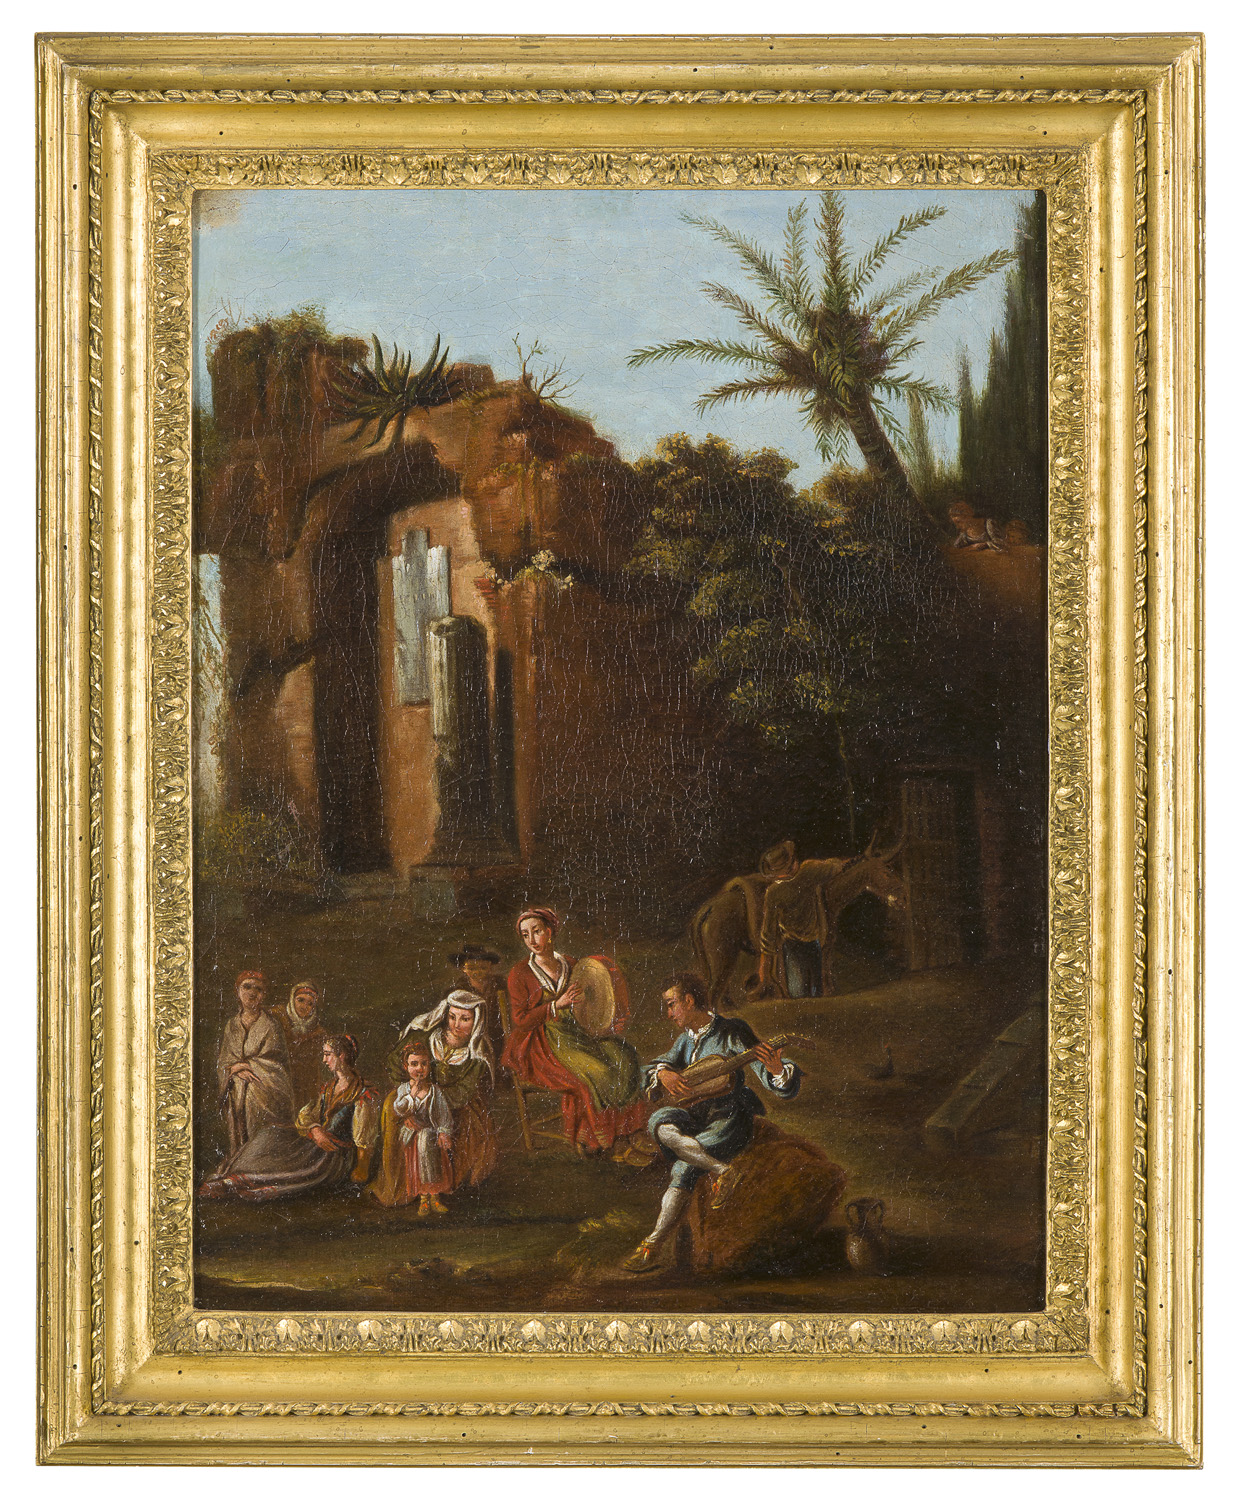 DUTCH OIL PAINTING OF A RURAL SCENE WITH RUINS LATE 17TH EARLY 18TH CENTURY